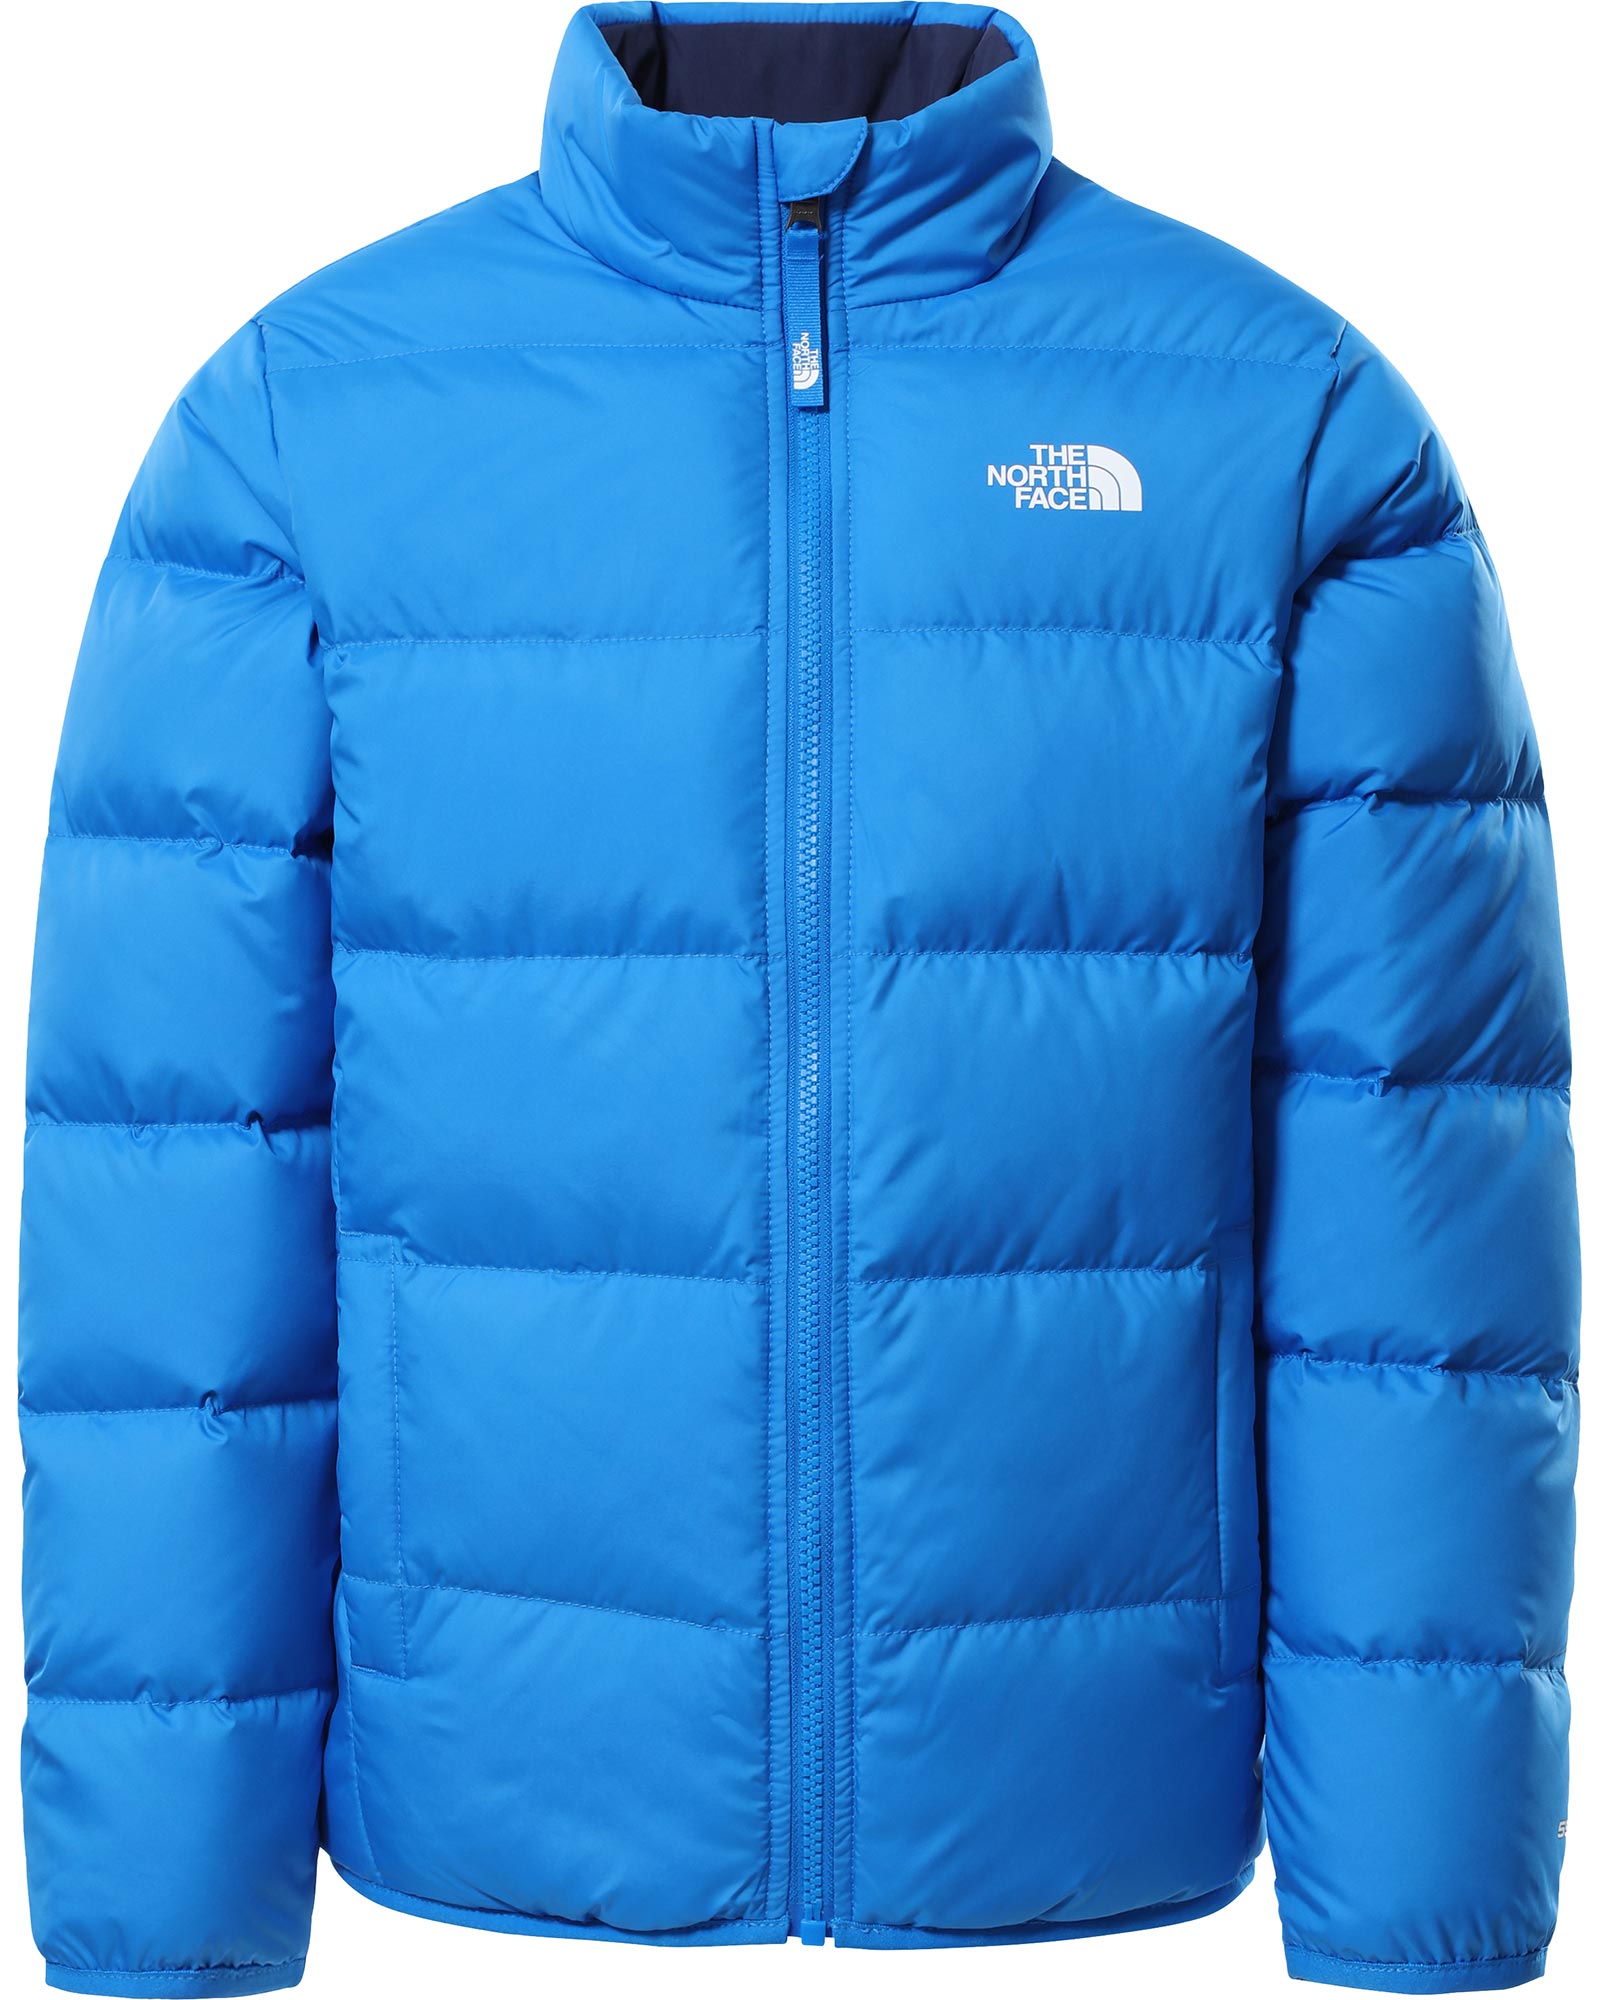 The North Face Reversible Andes Boys Jacket